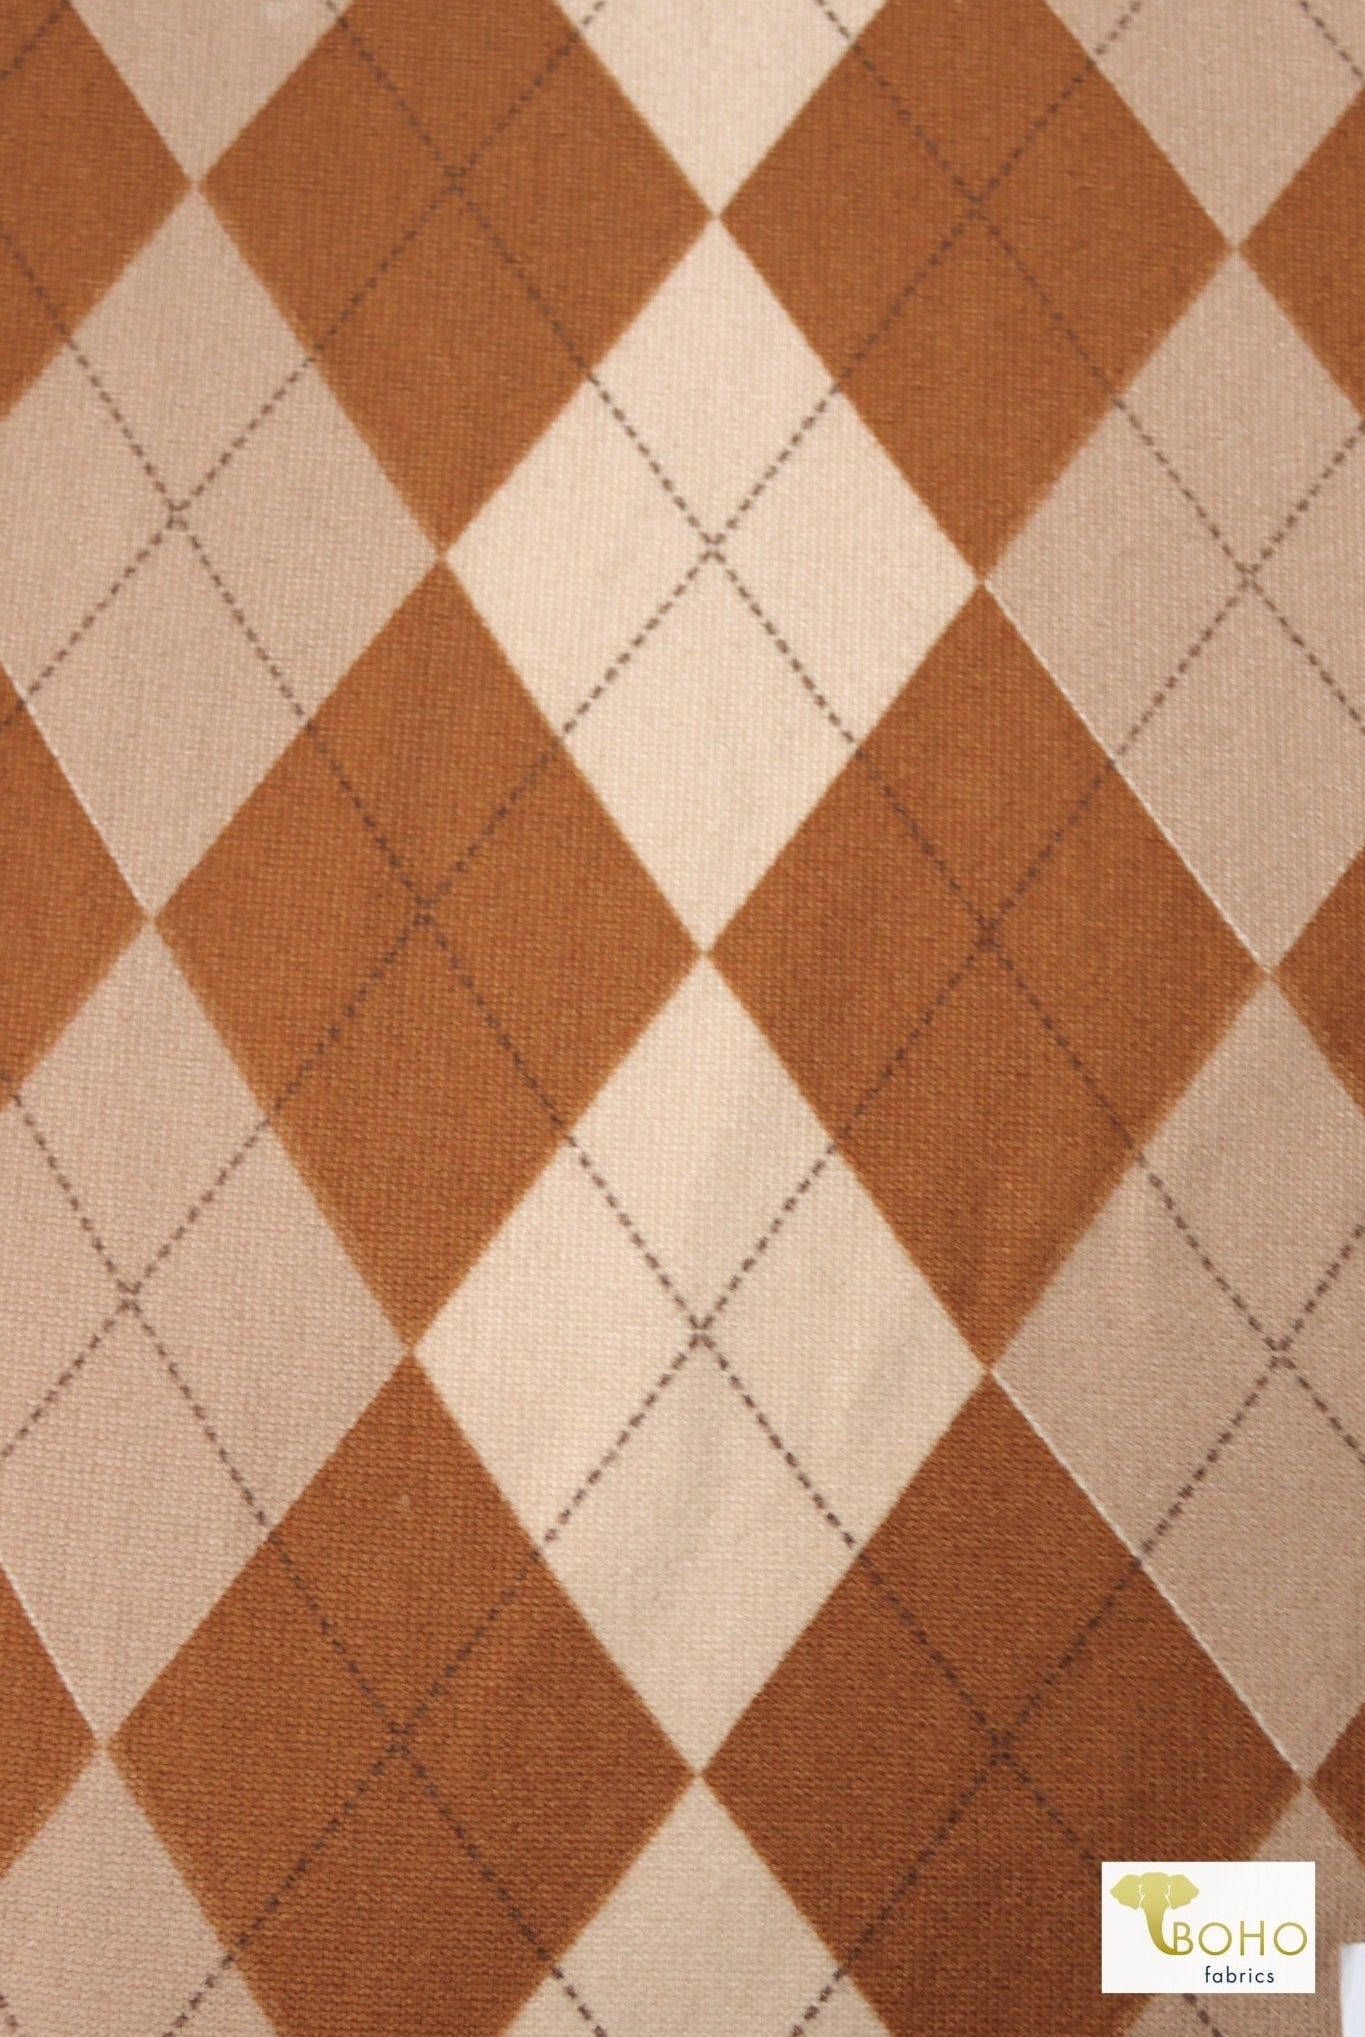 Argyle Plaid in Brown, Brushed Hacci Sweater Print, Knit Fabric - Boho Fabrics